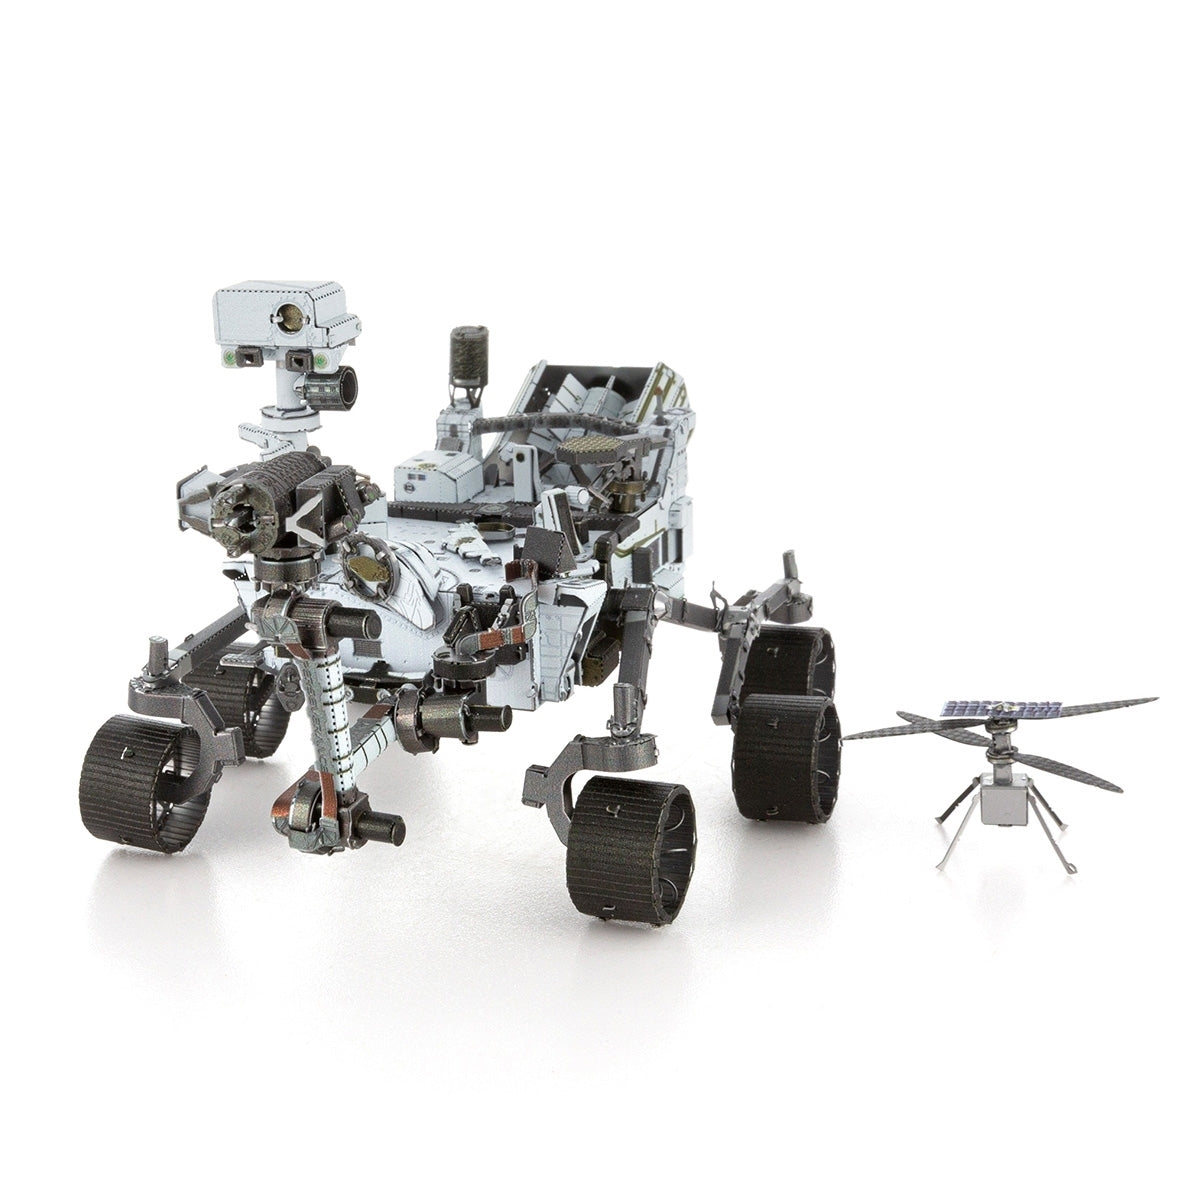 Metal Earth - Mars Rover Perseverance & Ingenuity Helicopter    